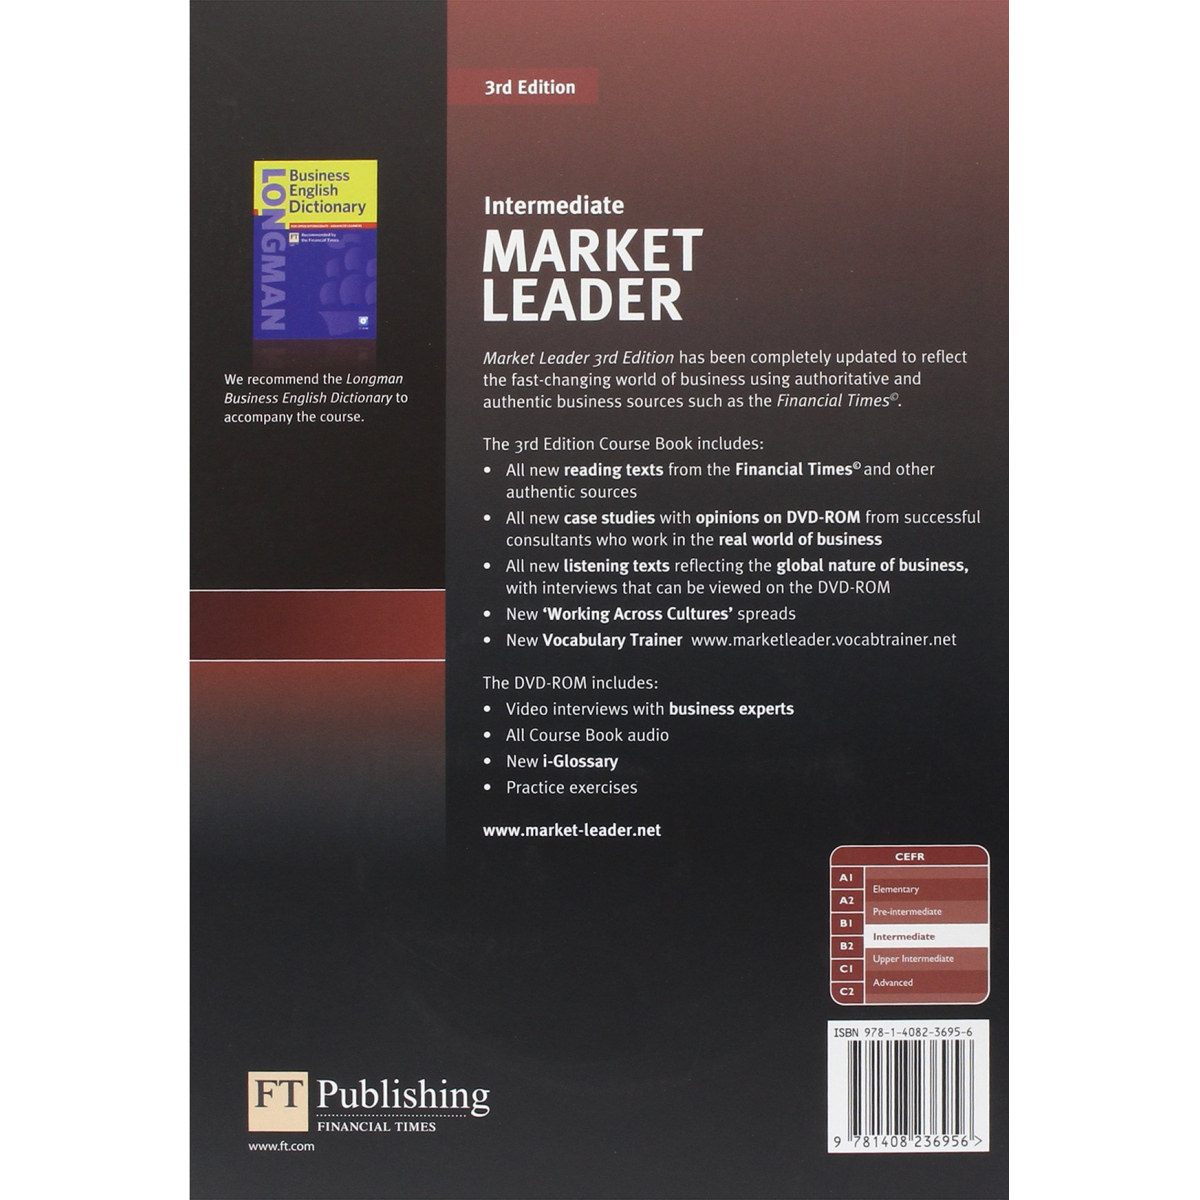 Pearson　File　Market　Book　DVD-ROM　Education　Practice　Beykoz　Intermediate　Leader　3rd　and　Edition　Course　Kitabevi